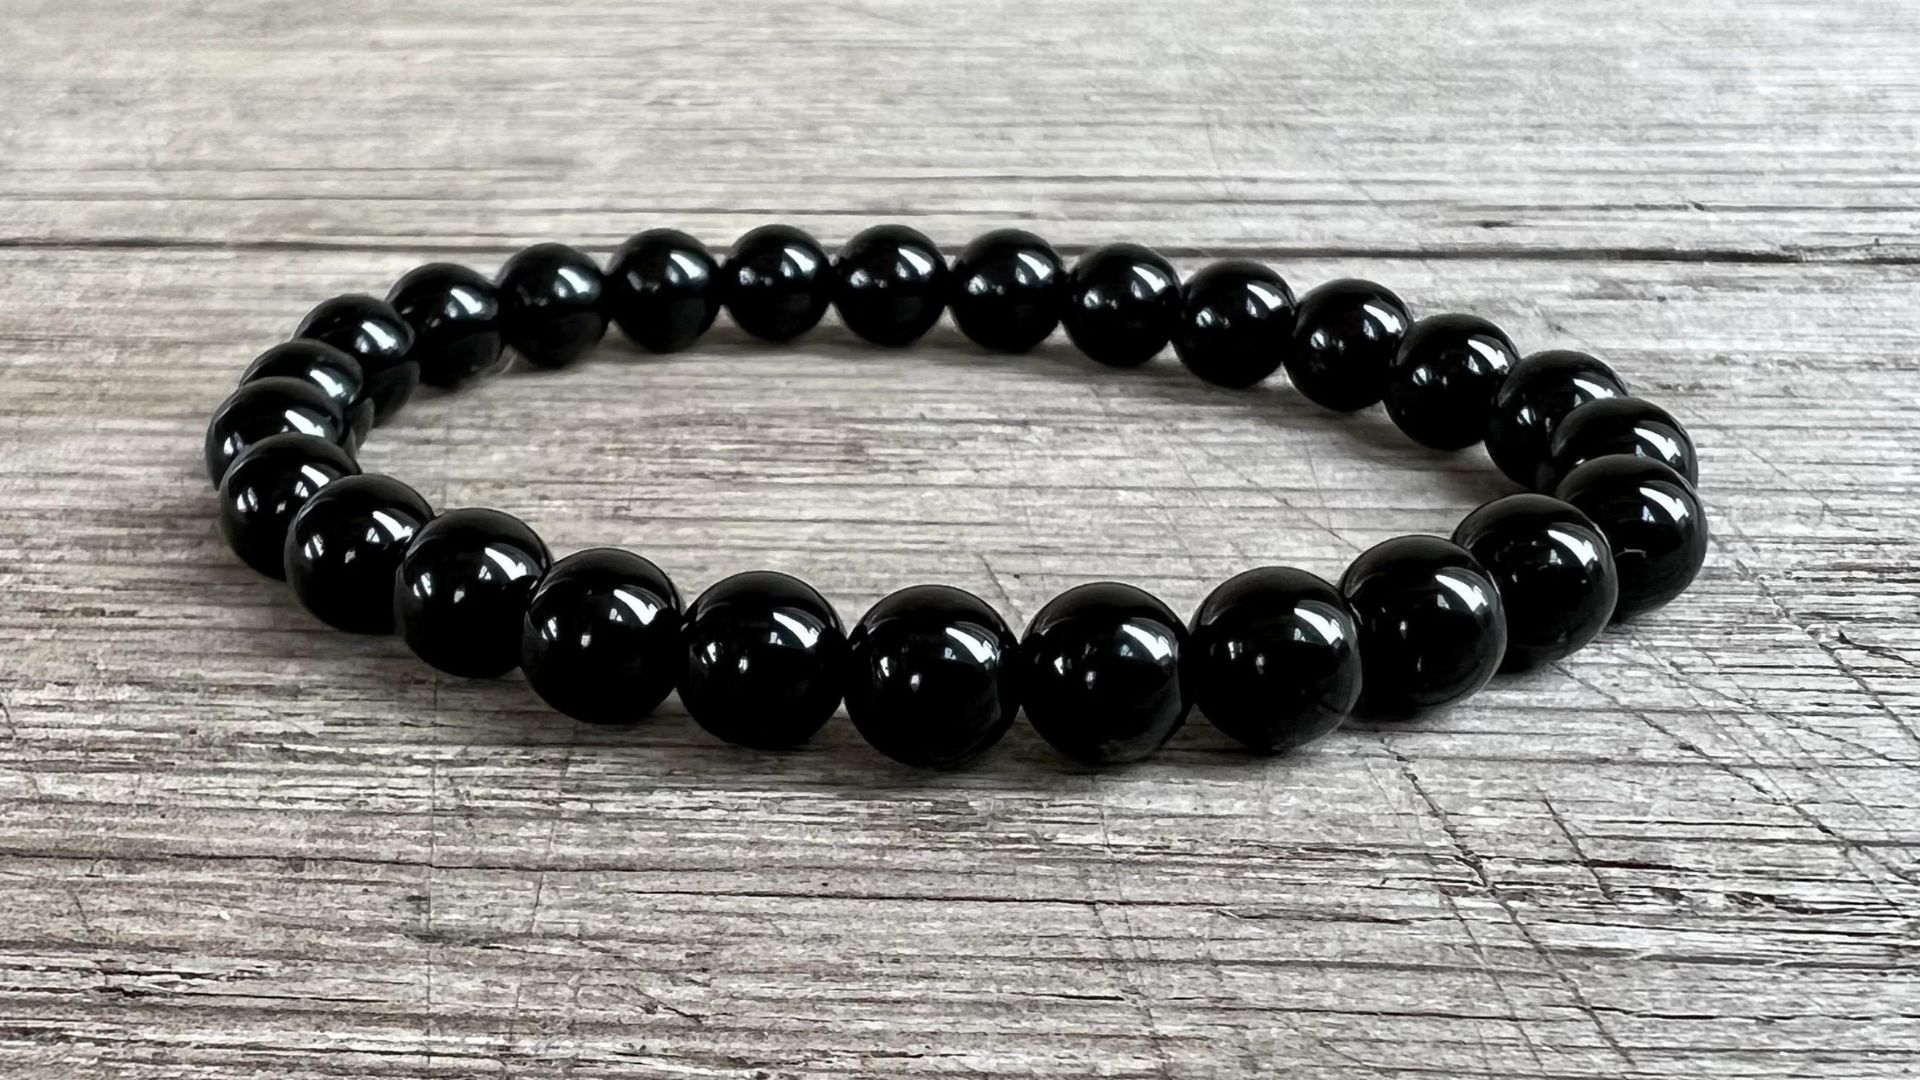 Black Onyx Bracelets - The Ultimate Accessory For Style And Protection